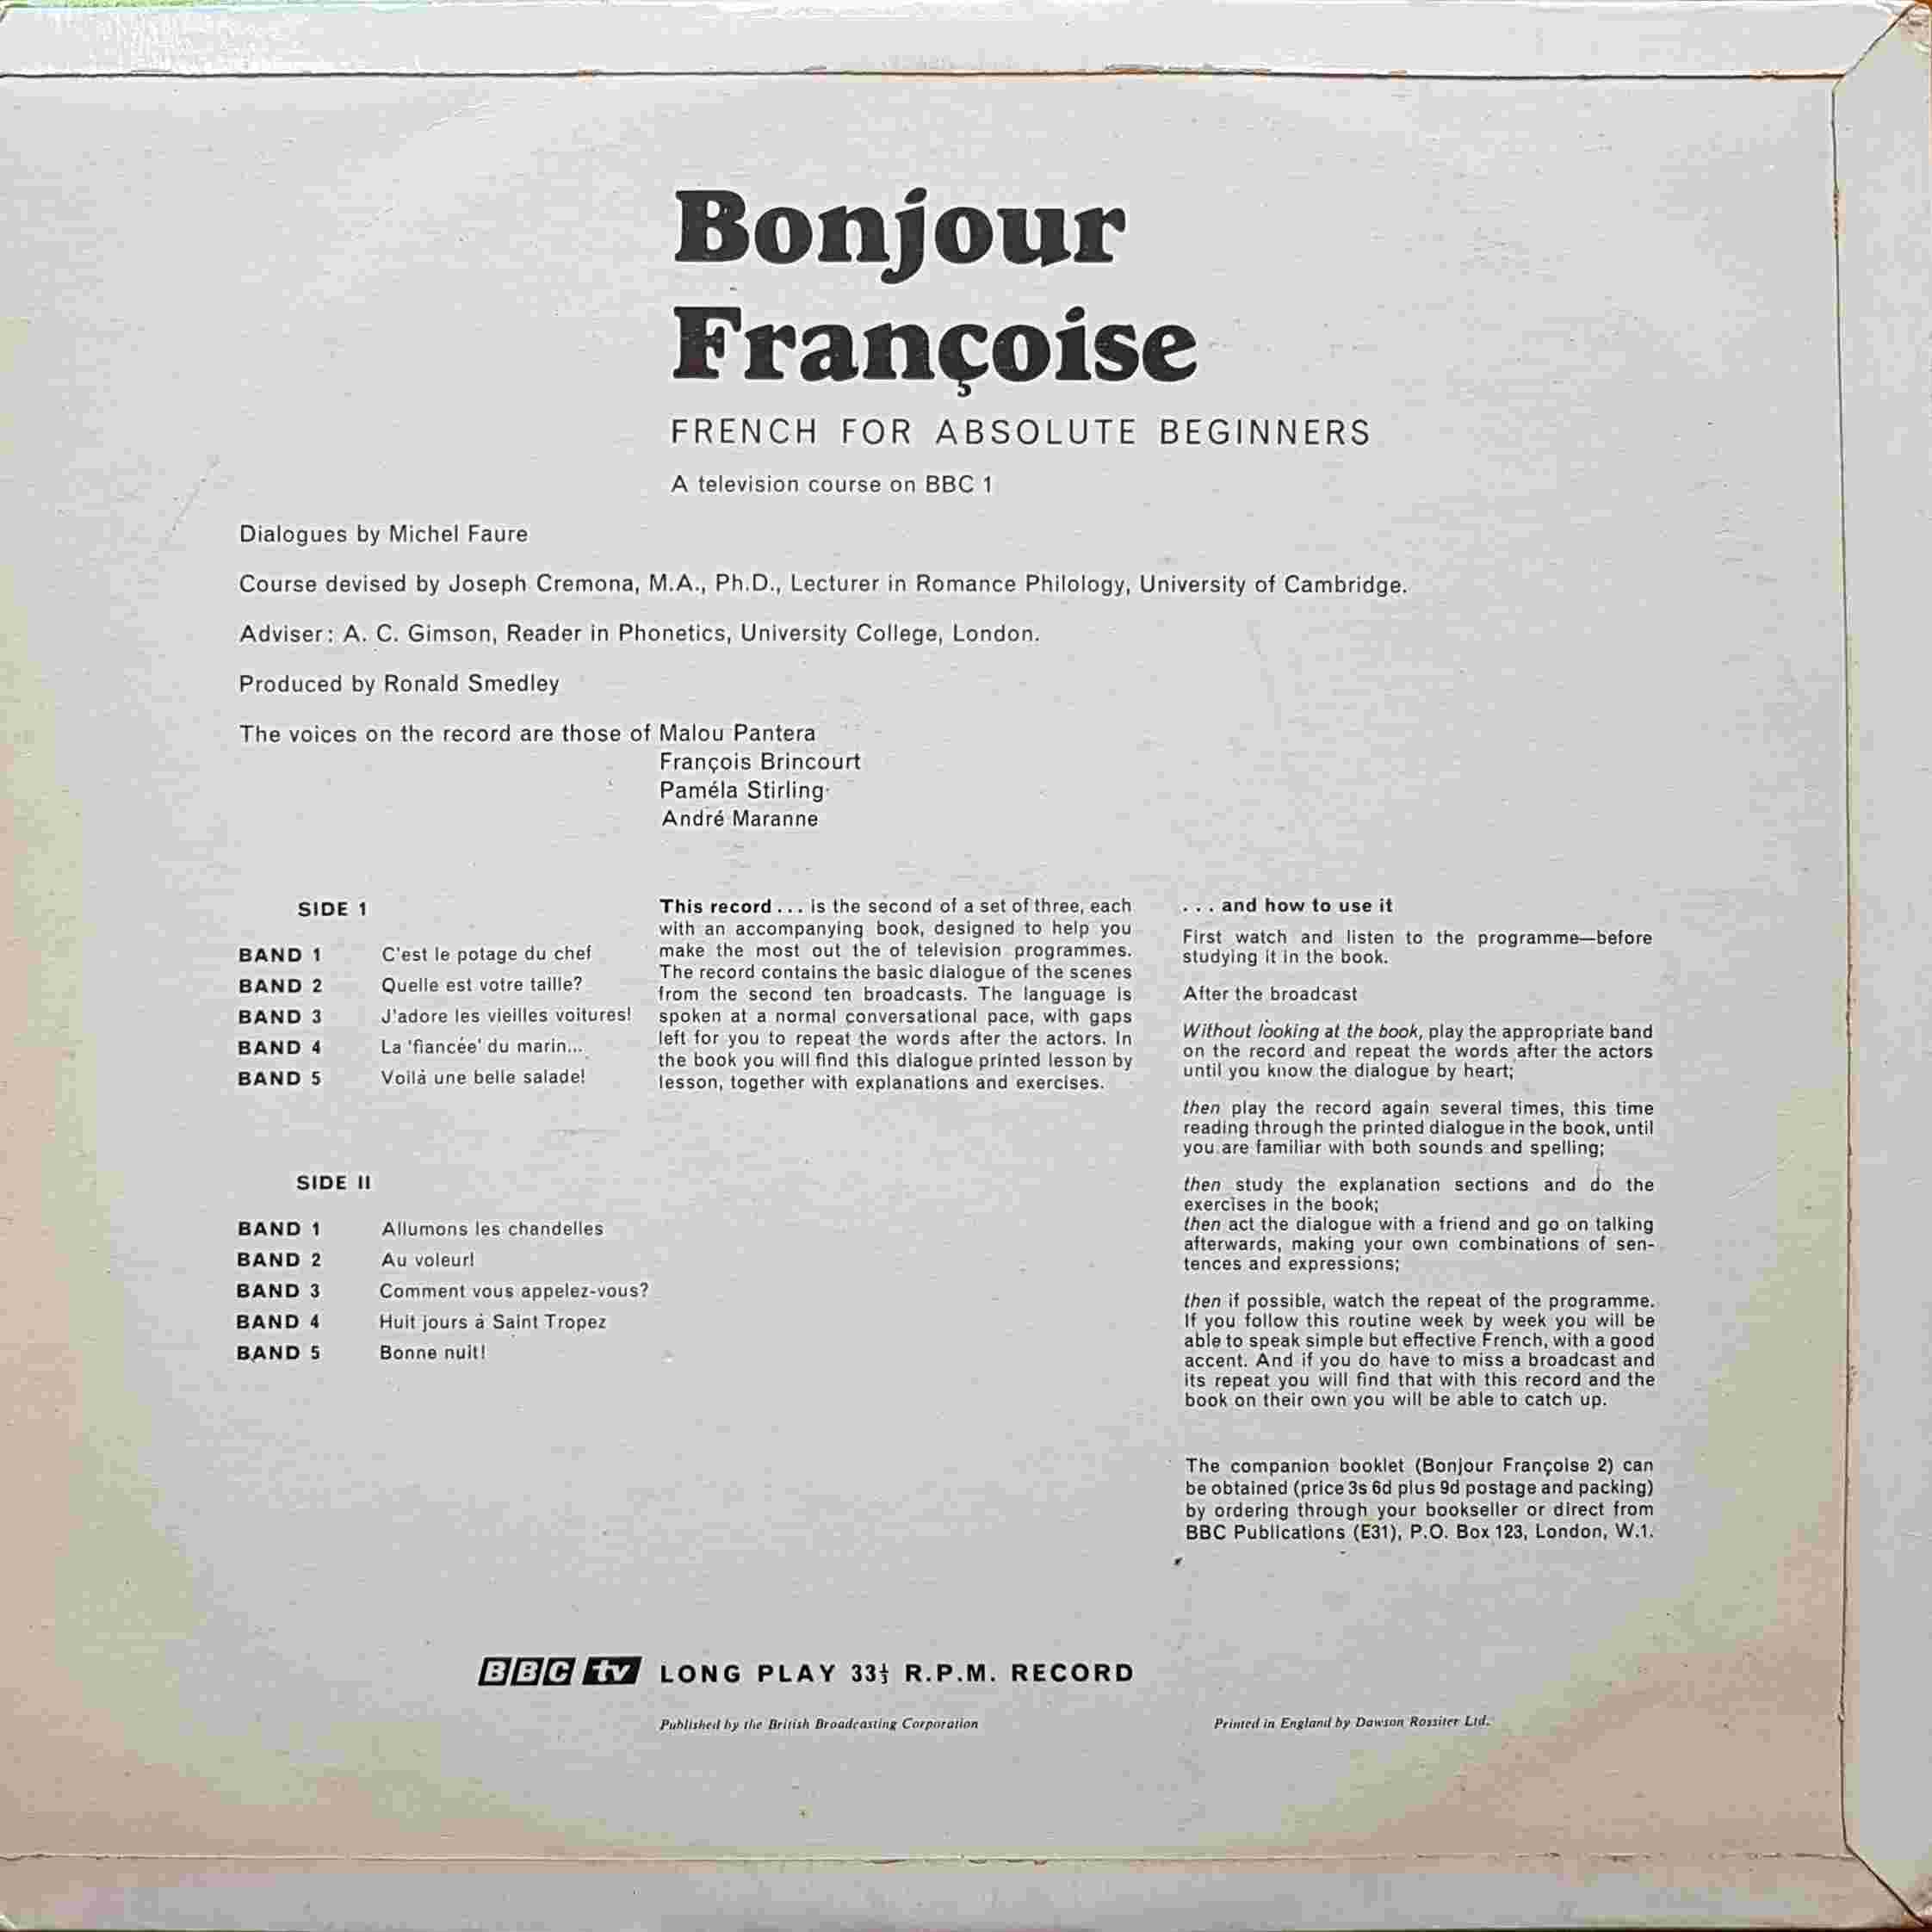 Picture of OP 43/44 Bonjour francoise - French for absolute beginners - Lessons 11 - 20 by artist Michel Faure / Joseph Cremona / A. C. Gimson from the BBC records and Tapes library